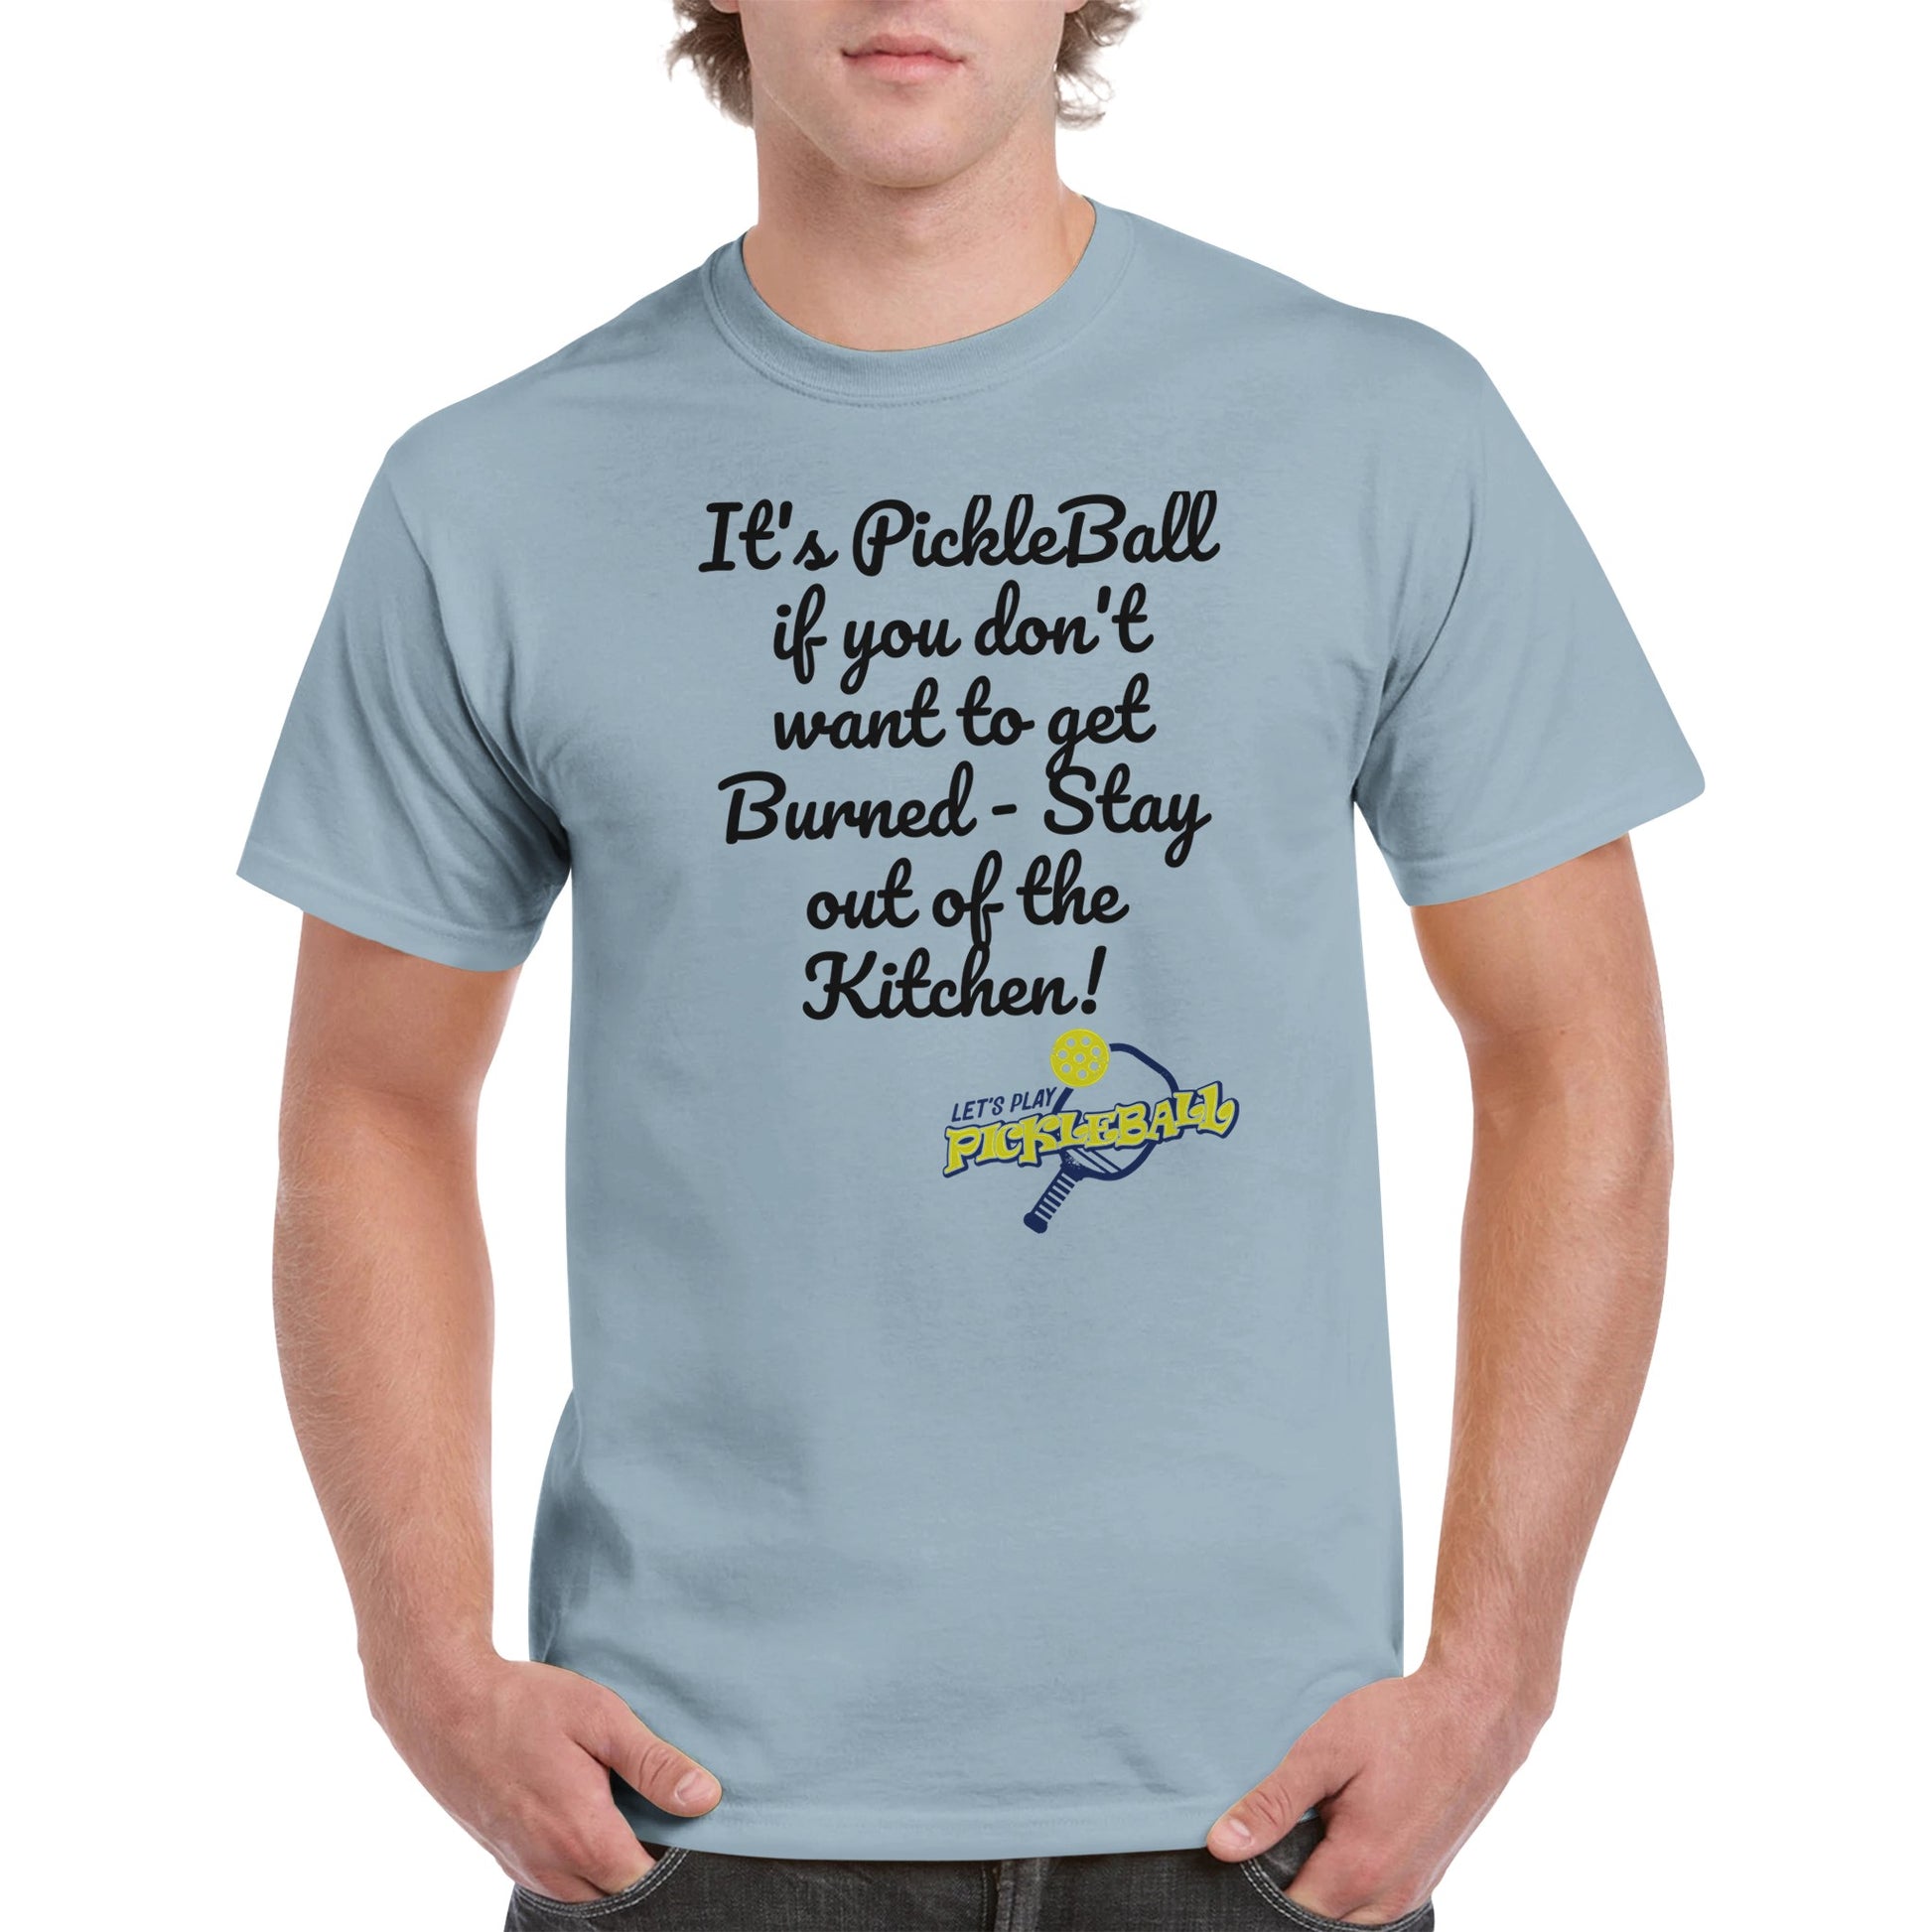 Light blue comfortable Unisex Crewneck heavyweight cotton t-shirt with funny saying It’s PickleBall if you don’t want to get Burned – Stay out of the Kitchen! and Let’s Play Pickleball logo on the front from WhatYa Say Apparel worn by blonde-haired male front view.